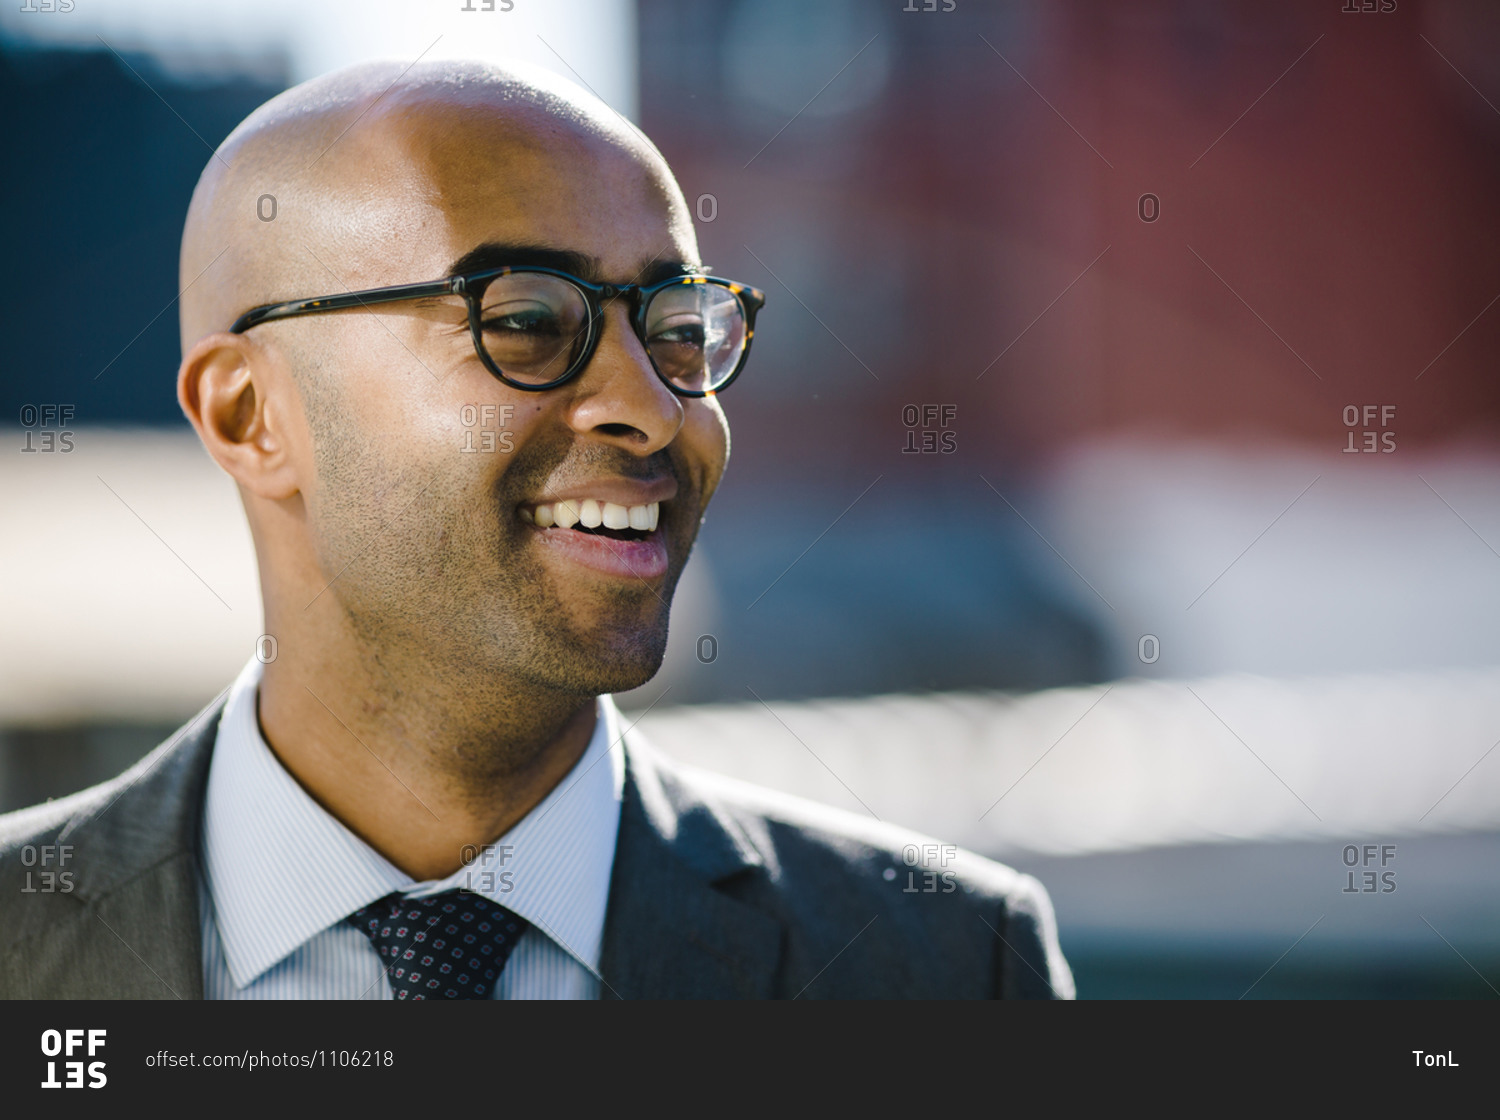 Portrait of a bald black man in a suit and glasses looking off into the distance and smiling